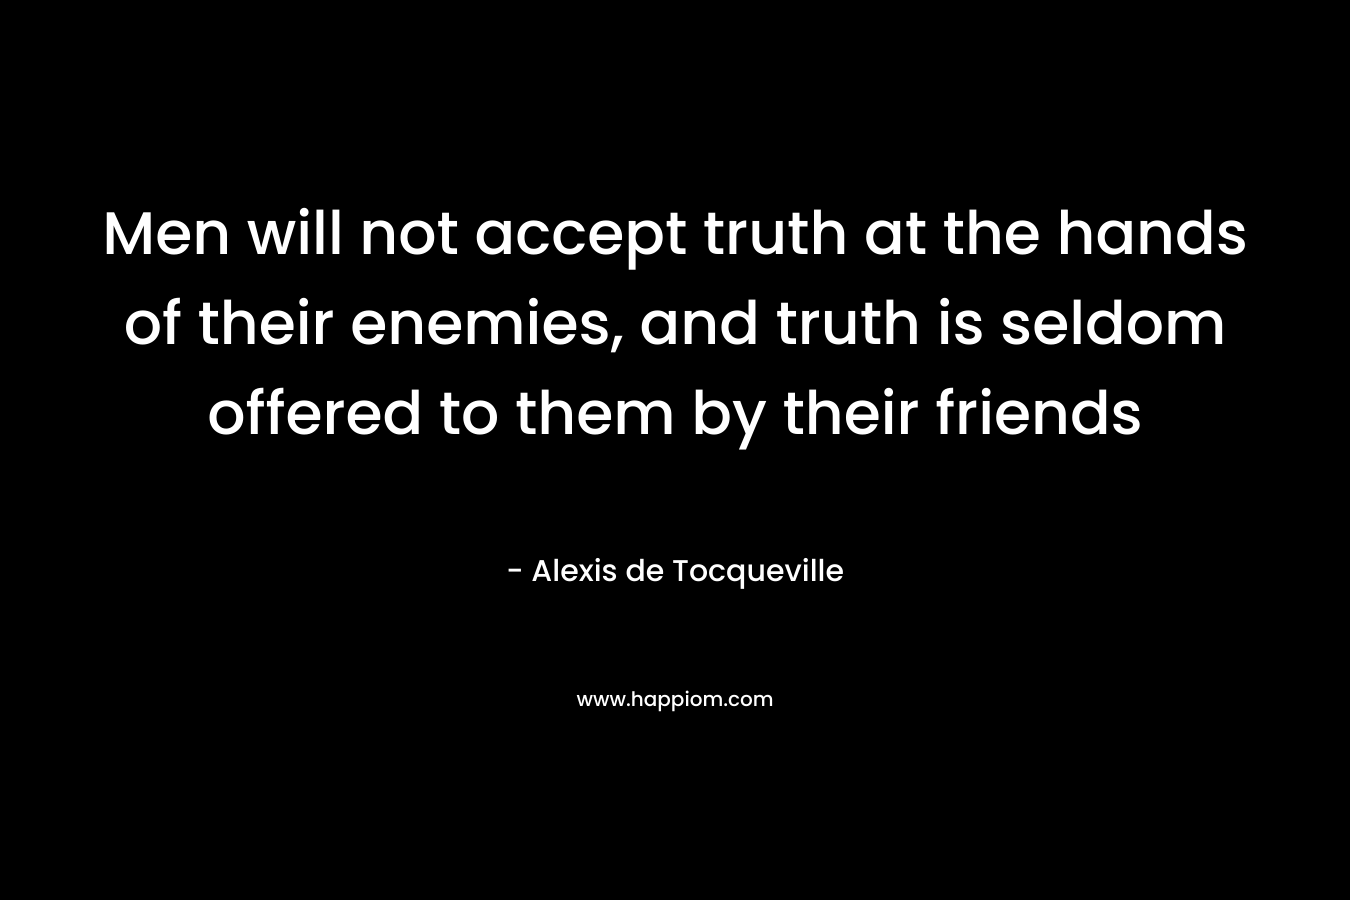 Men will not accept truth at the hands of their enemies, and truth is seldom offered to them by their friends